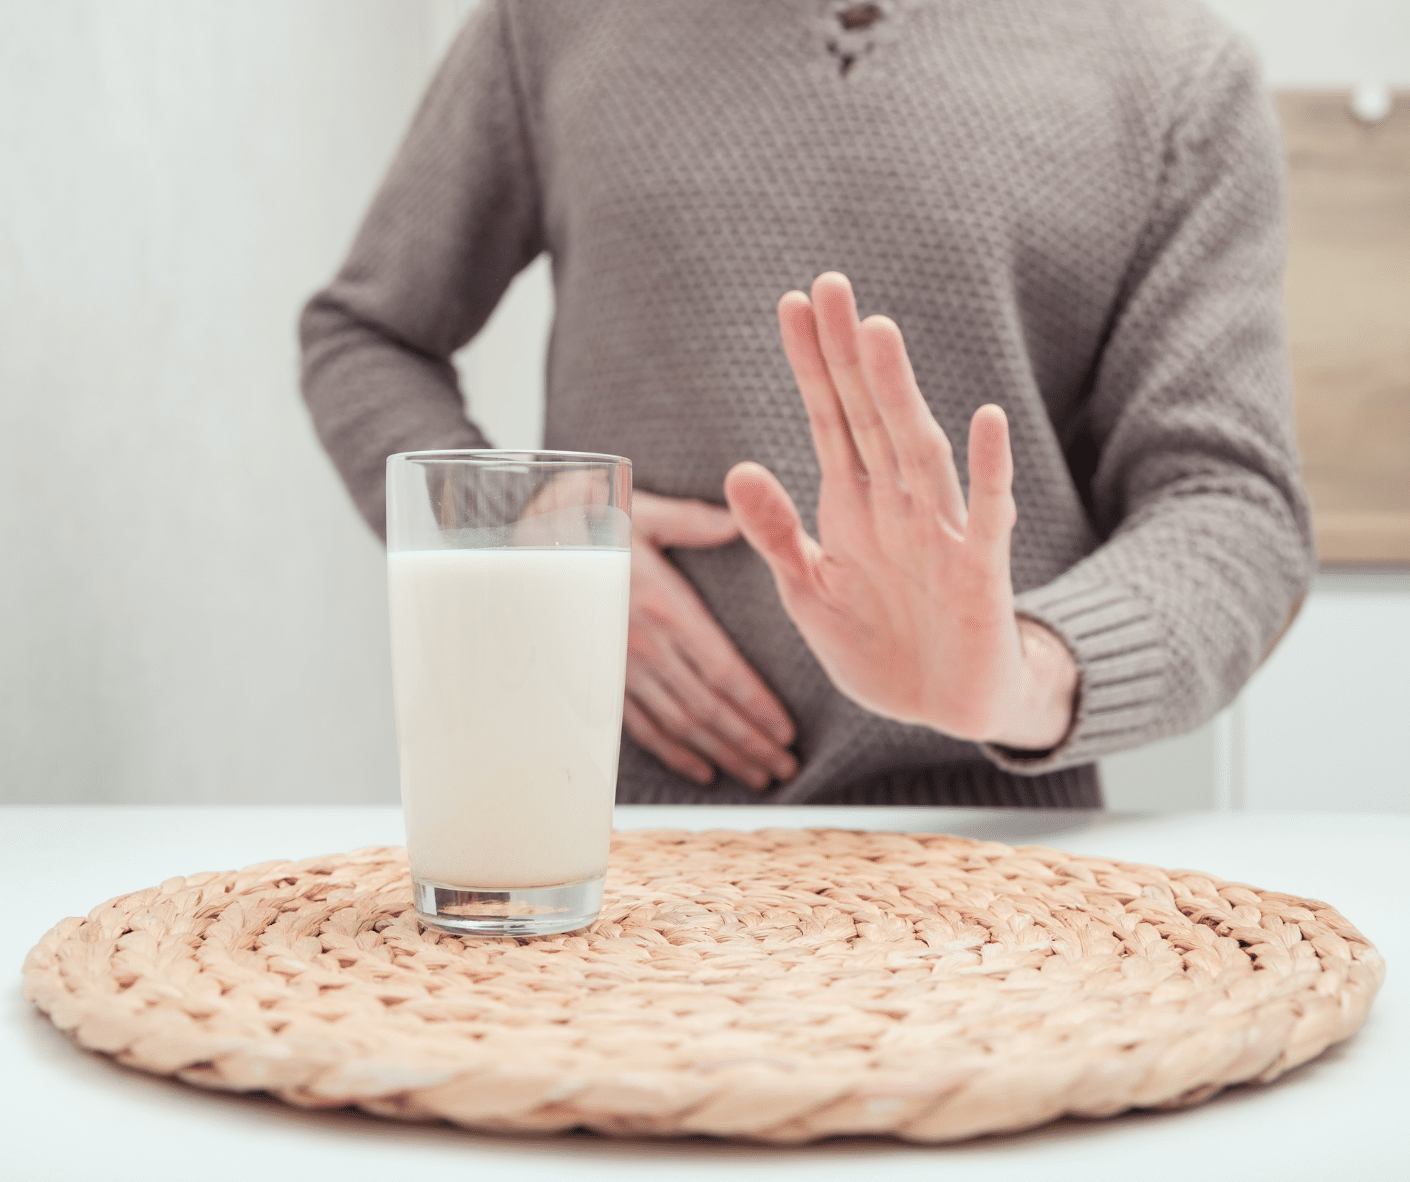 person rejecting dairy with outstreached hand, is milk good for you